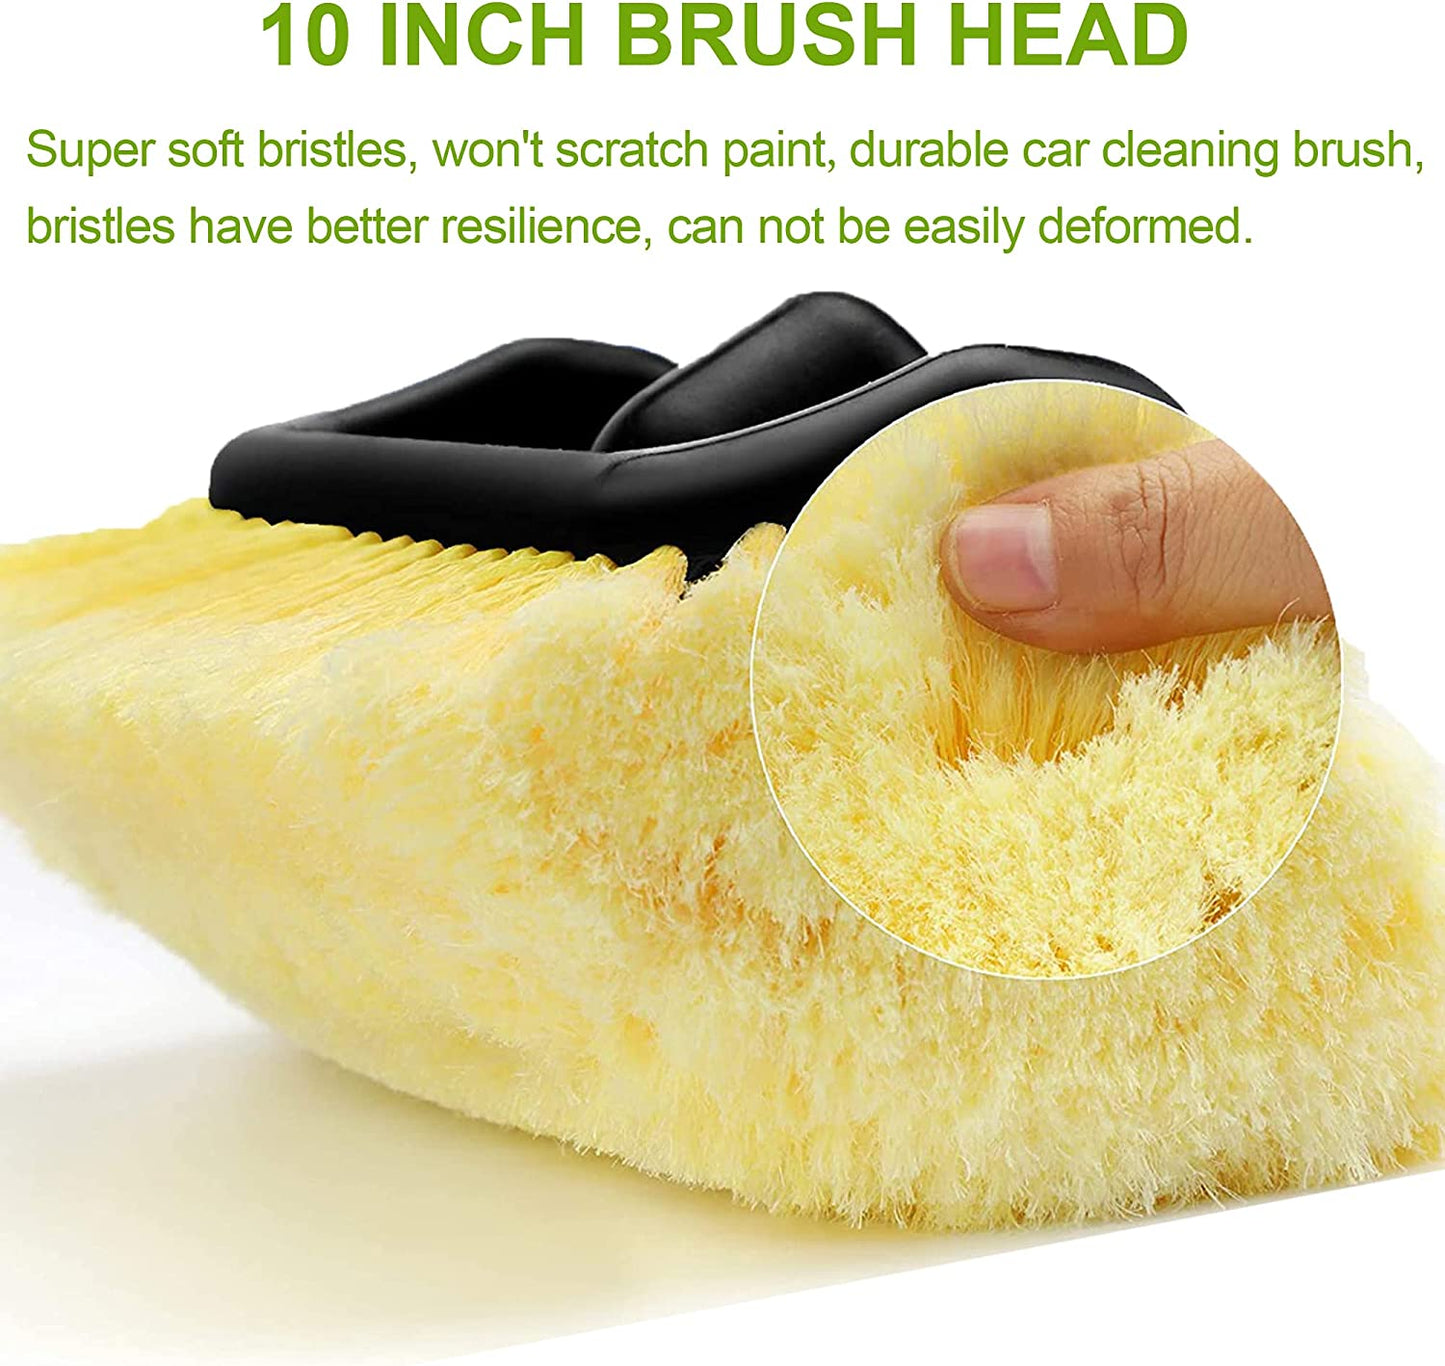 51-Inch Car Wash Brush with 10-Inch Soft Bristle, On/Off Switch for Car Truck Boat Washing Brush, Perfect for Cleaning House Siding, Auto Cars, Trucks, SUV, RV, Floors and More!